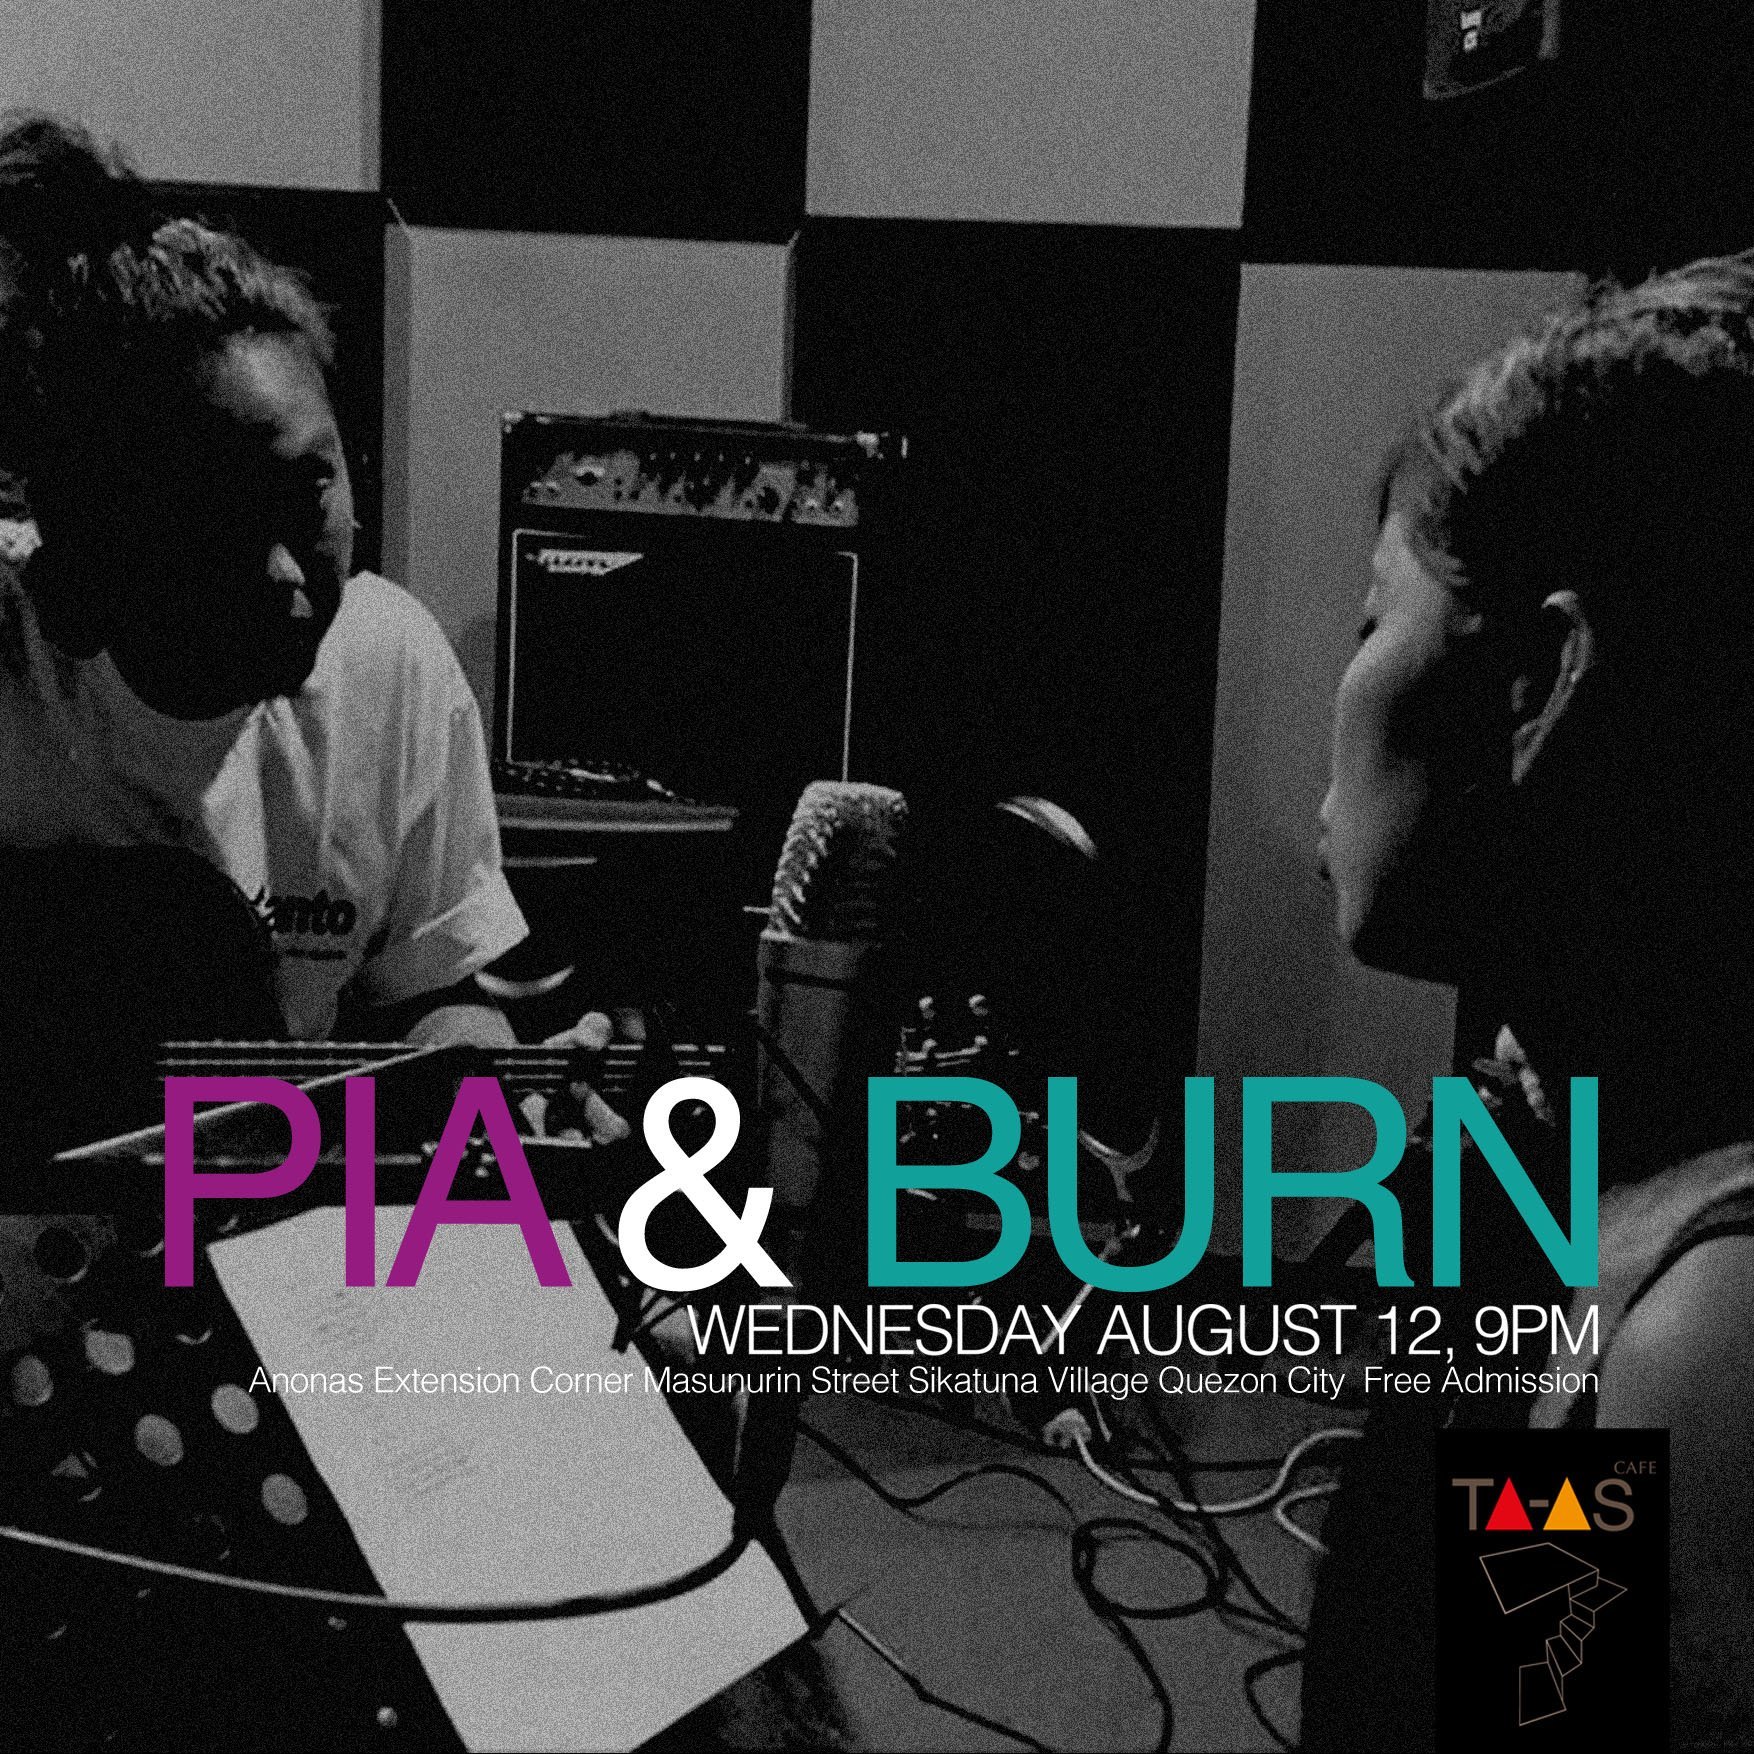 TA-AS Café Pia and Burn tonight Aug 12, 2015 at TA-AS Cafe